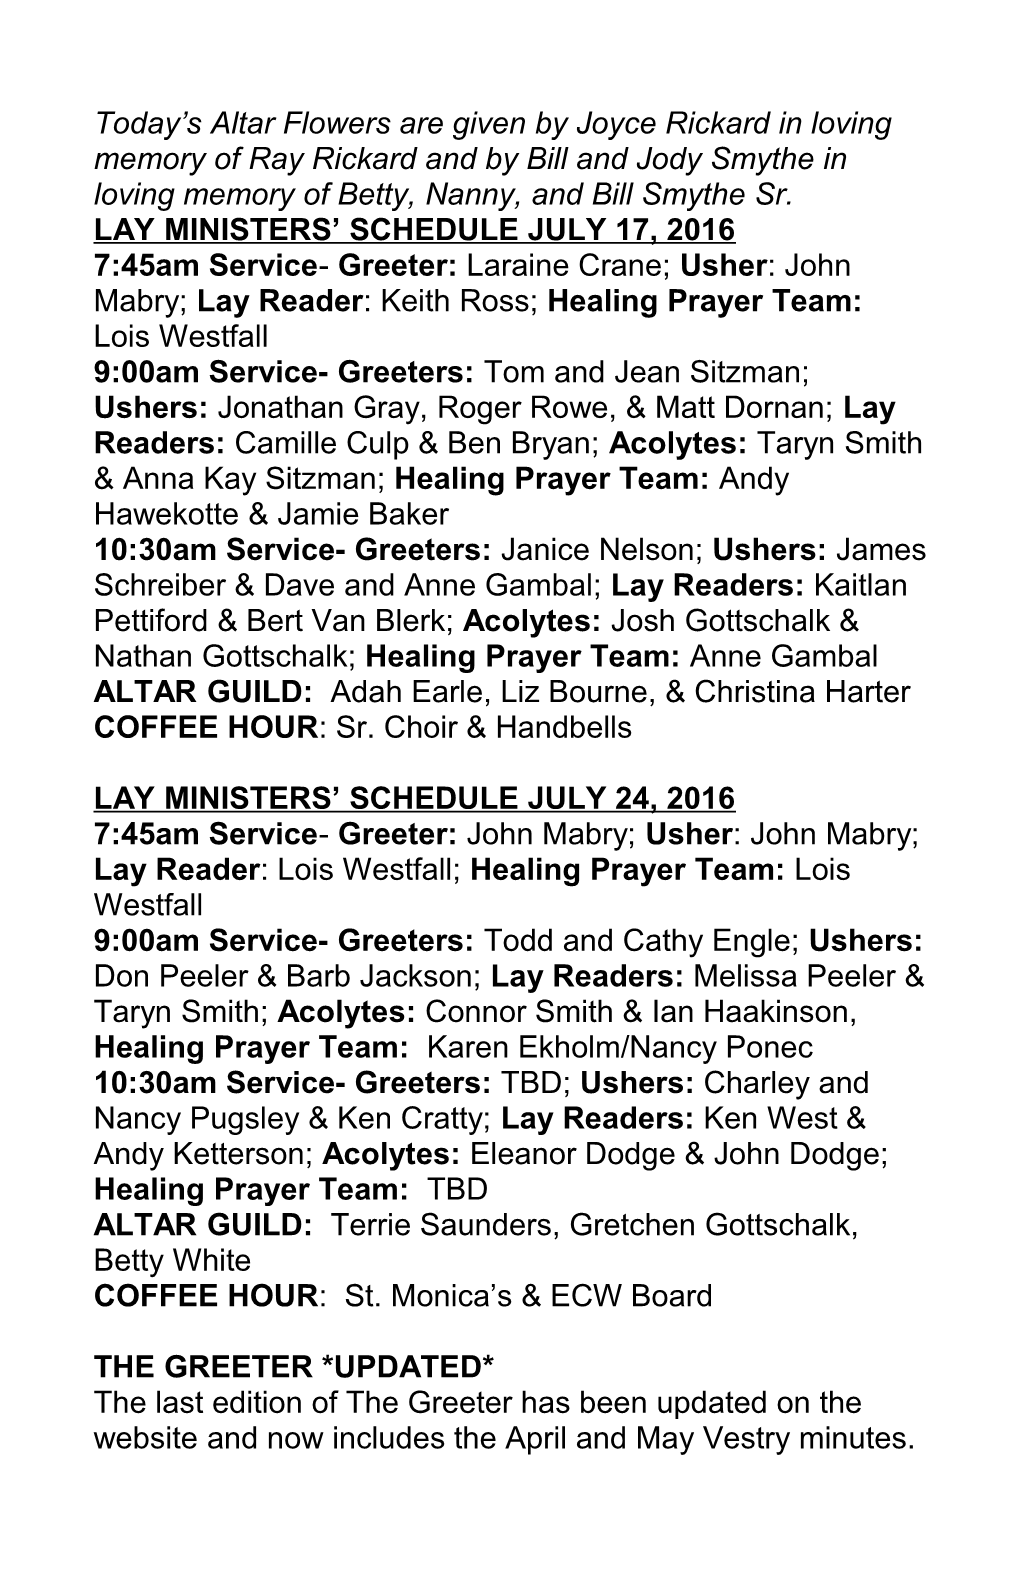 Lay Ministers Schedule July 17, 2016